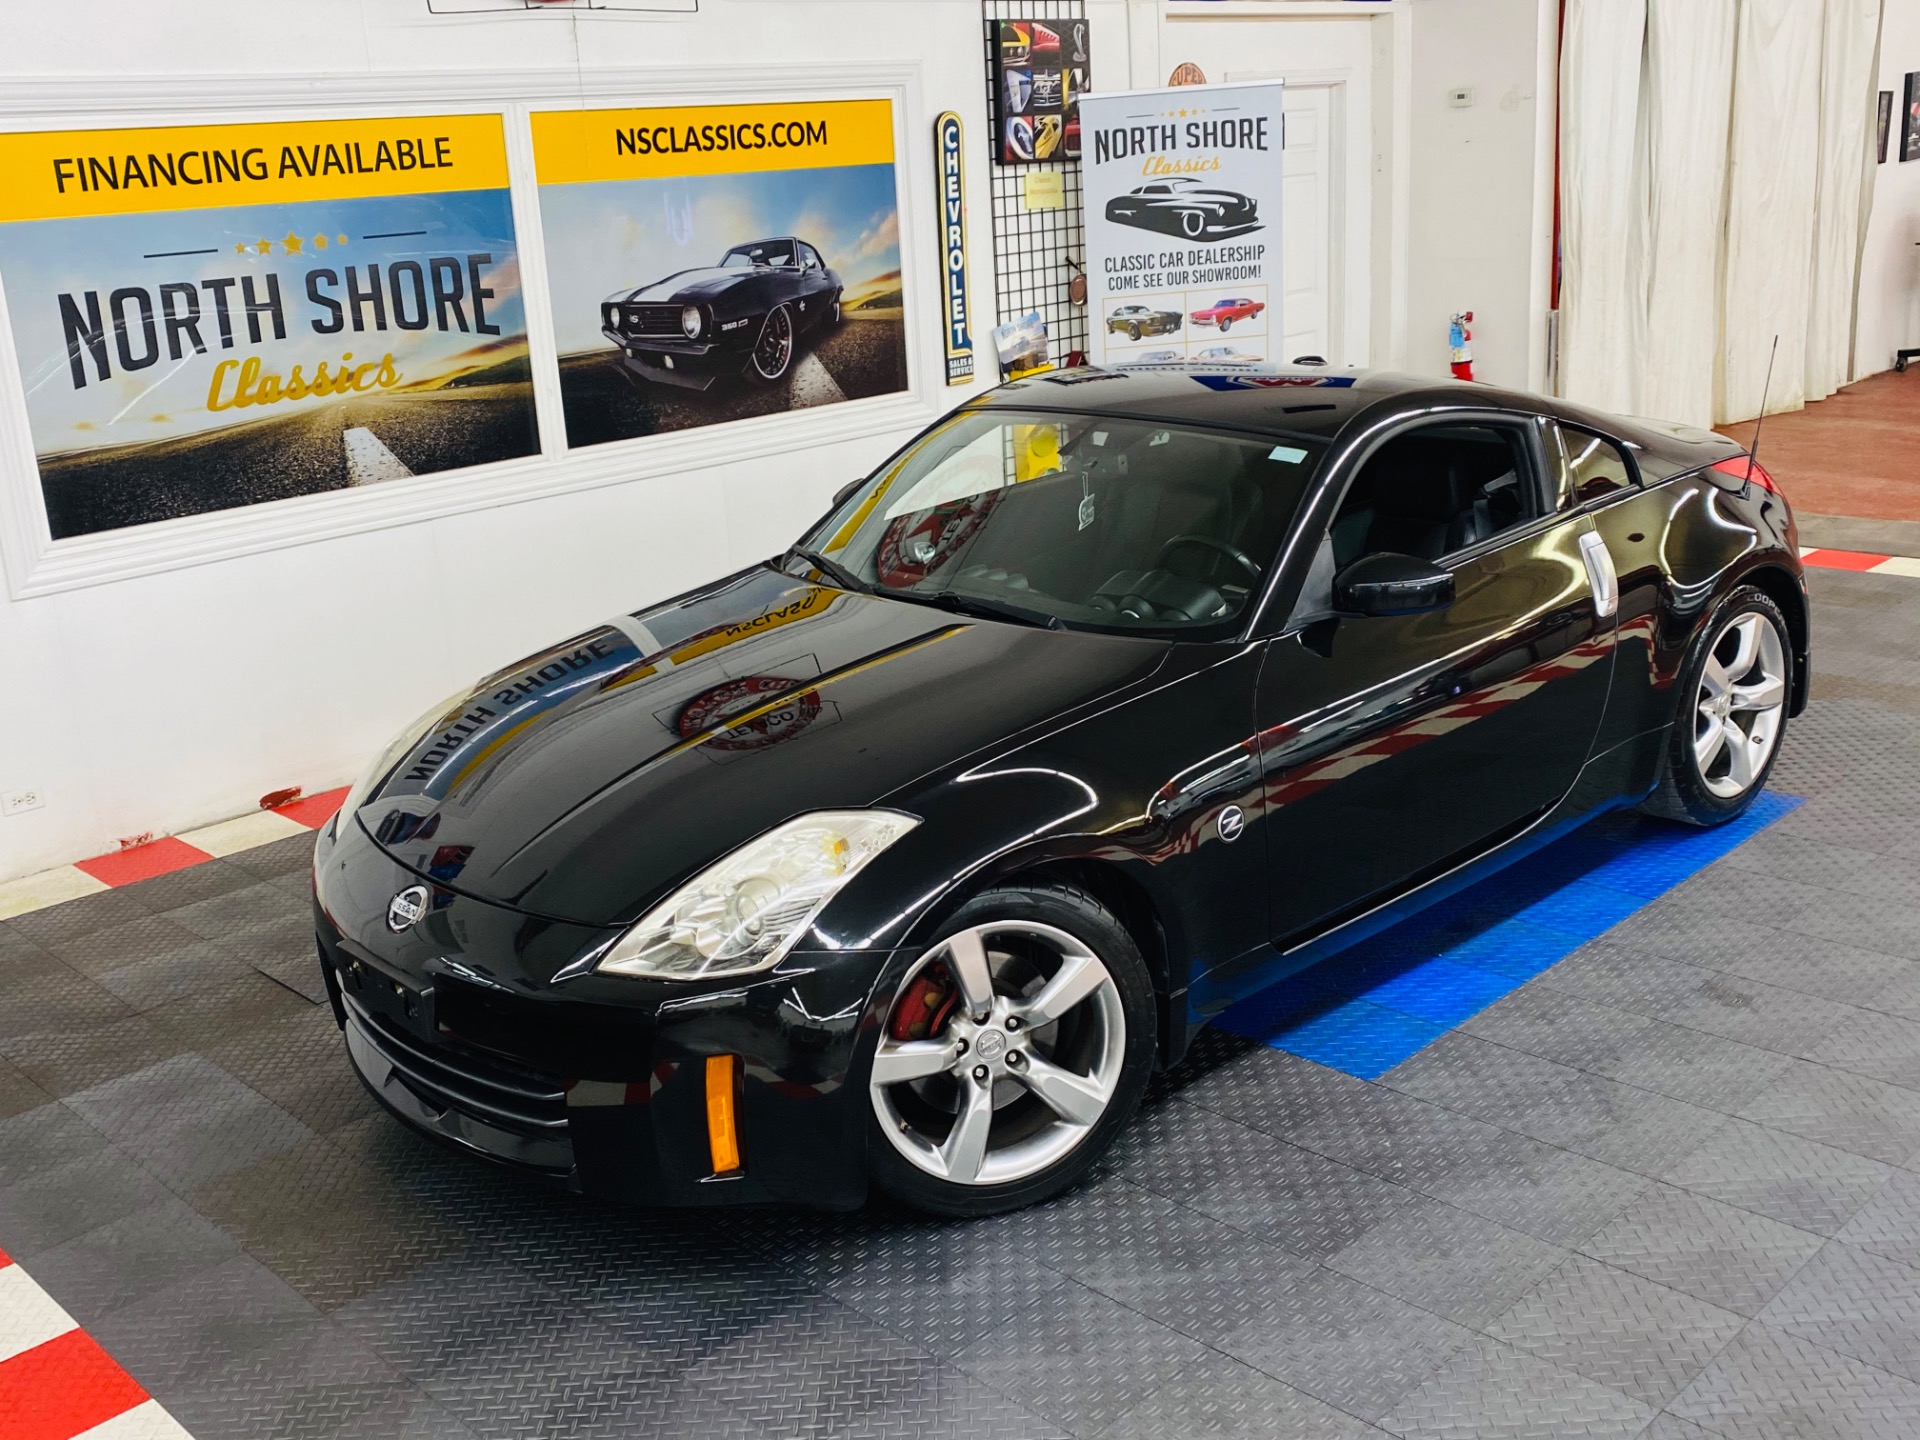 Used 2006 Nissan 350Z Enthusiast SEE VIDEO For Sale (Sold) North  Shore Classics Stock #06155CV